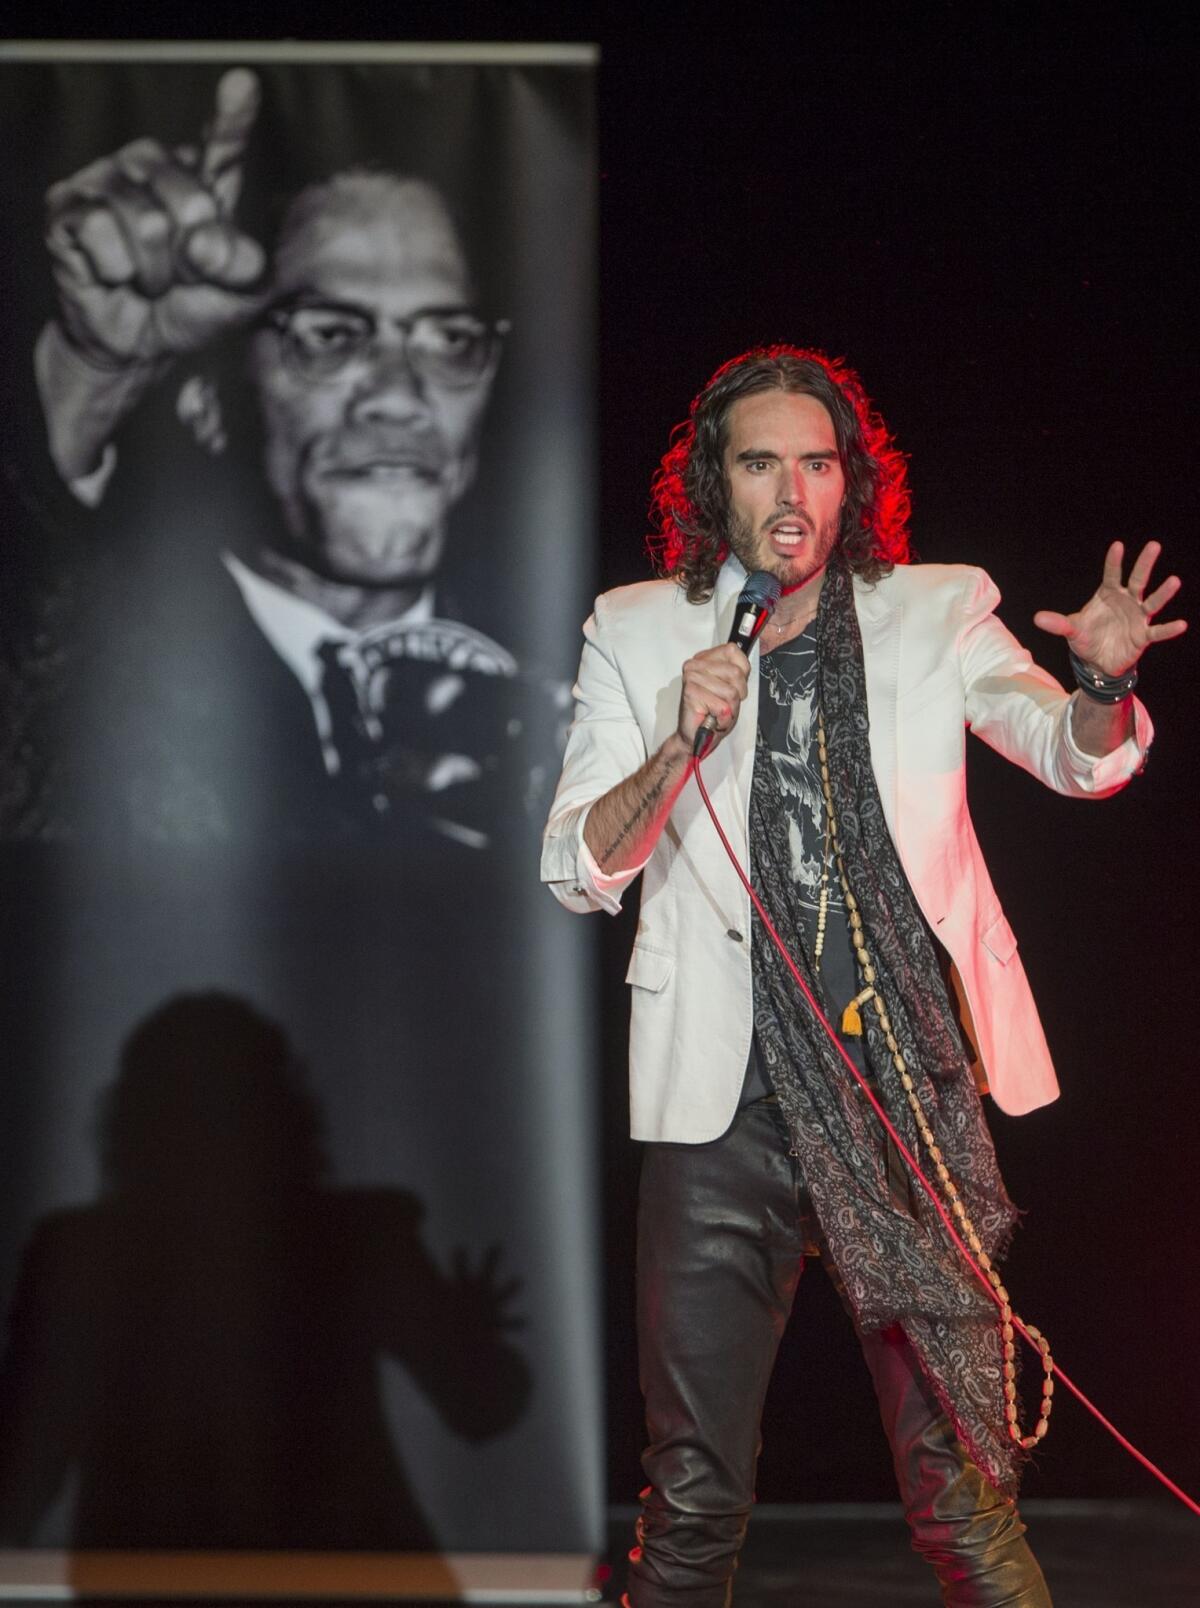 Russell Brand is better known for his work as an entertainer than an author.